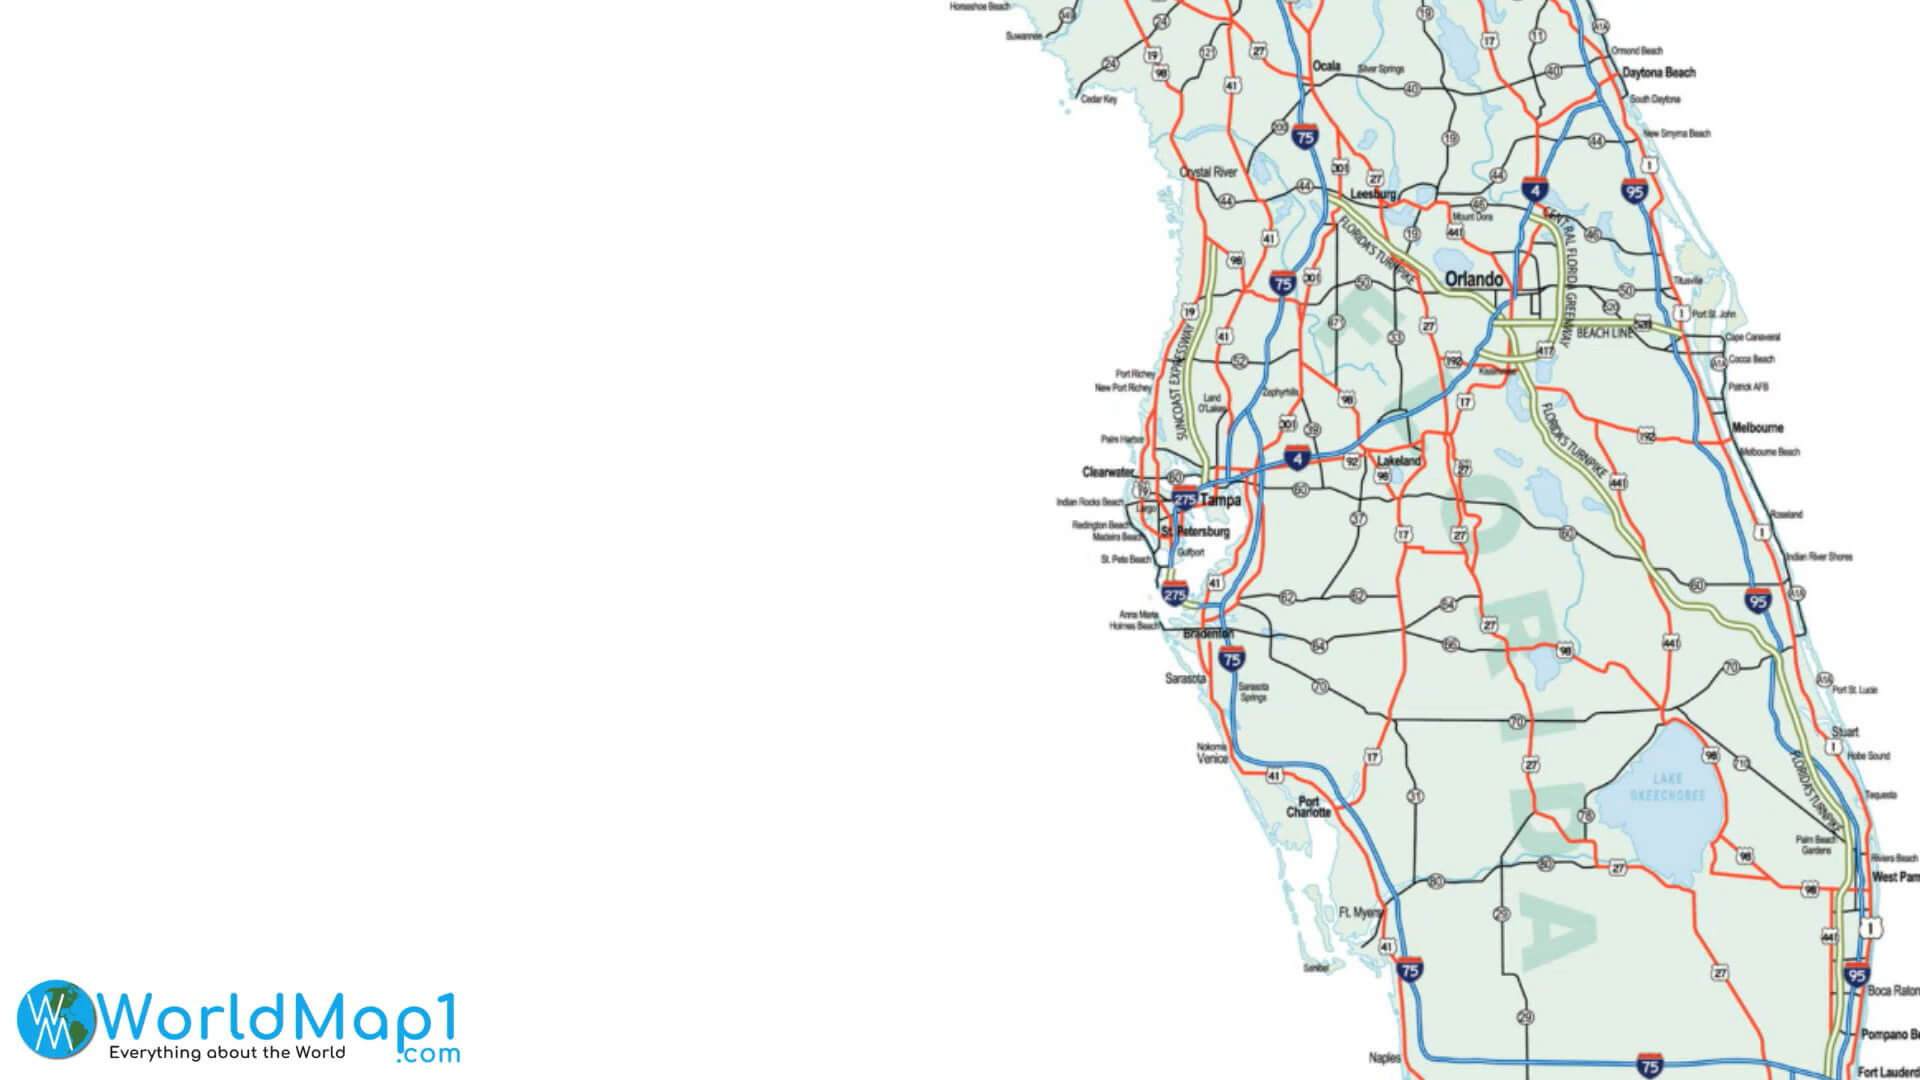 Florida Roads and Train Lines Map